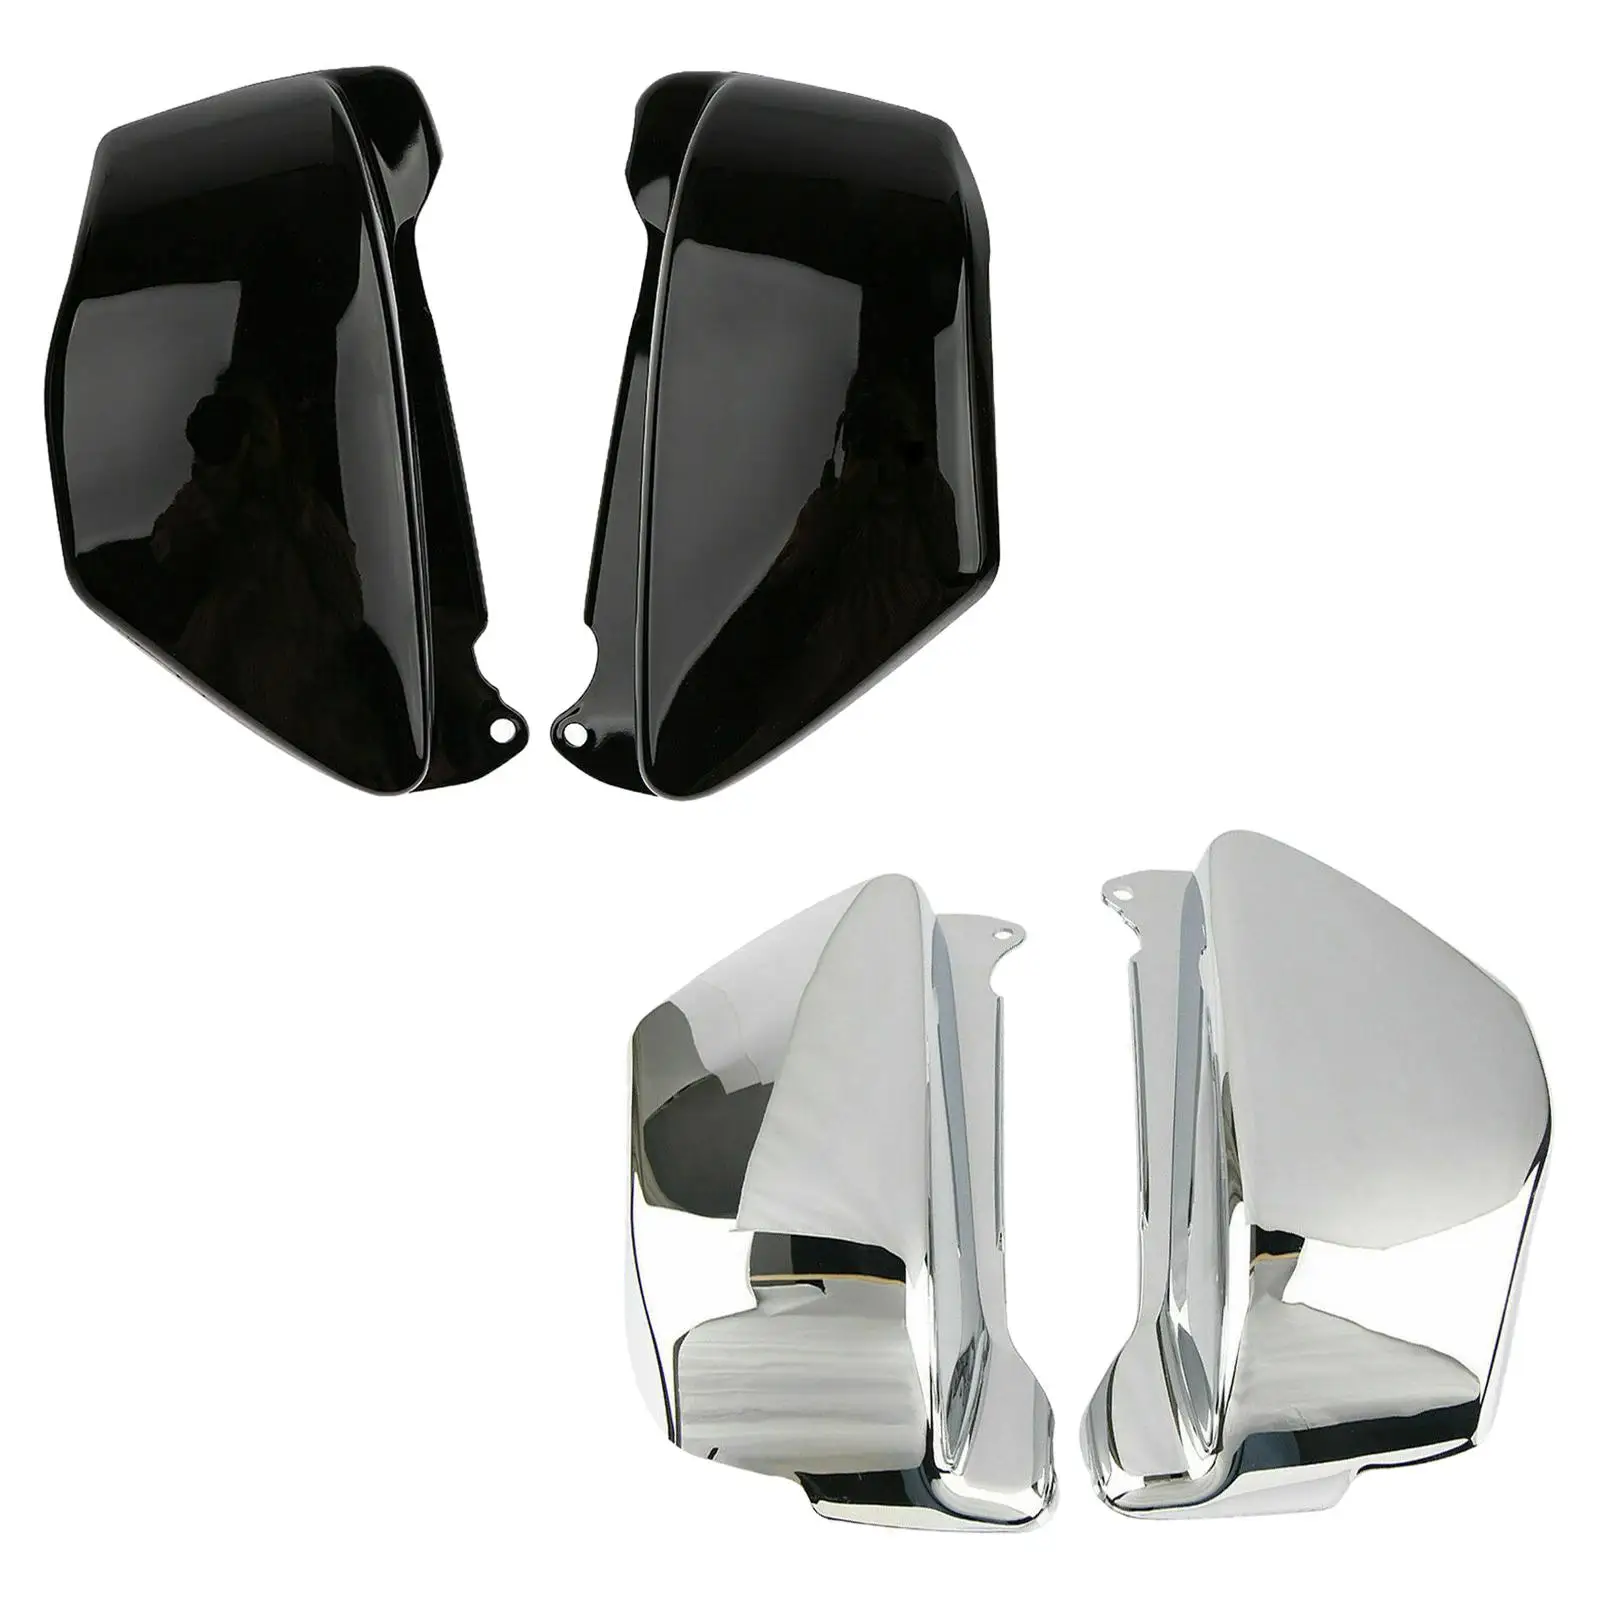 

s Chrome Battery Side Fairing Covers, Two Guard for Vf750 Vf750